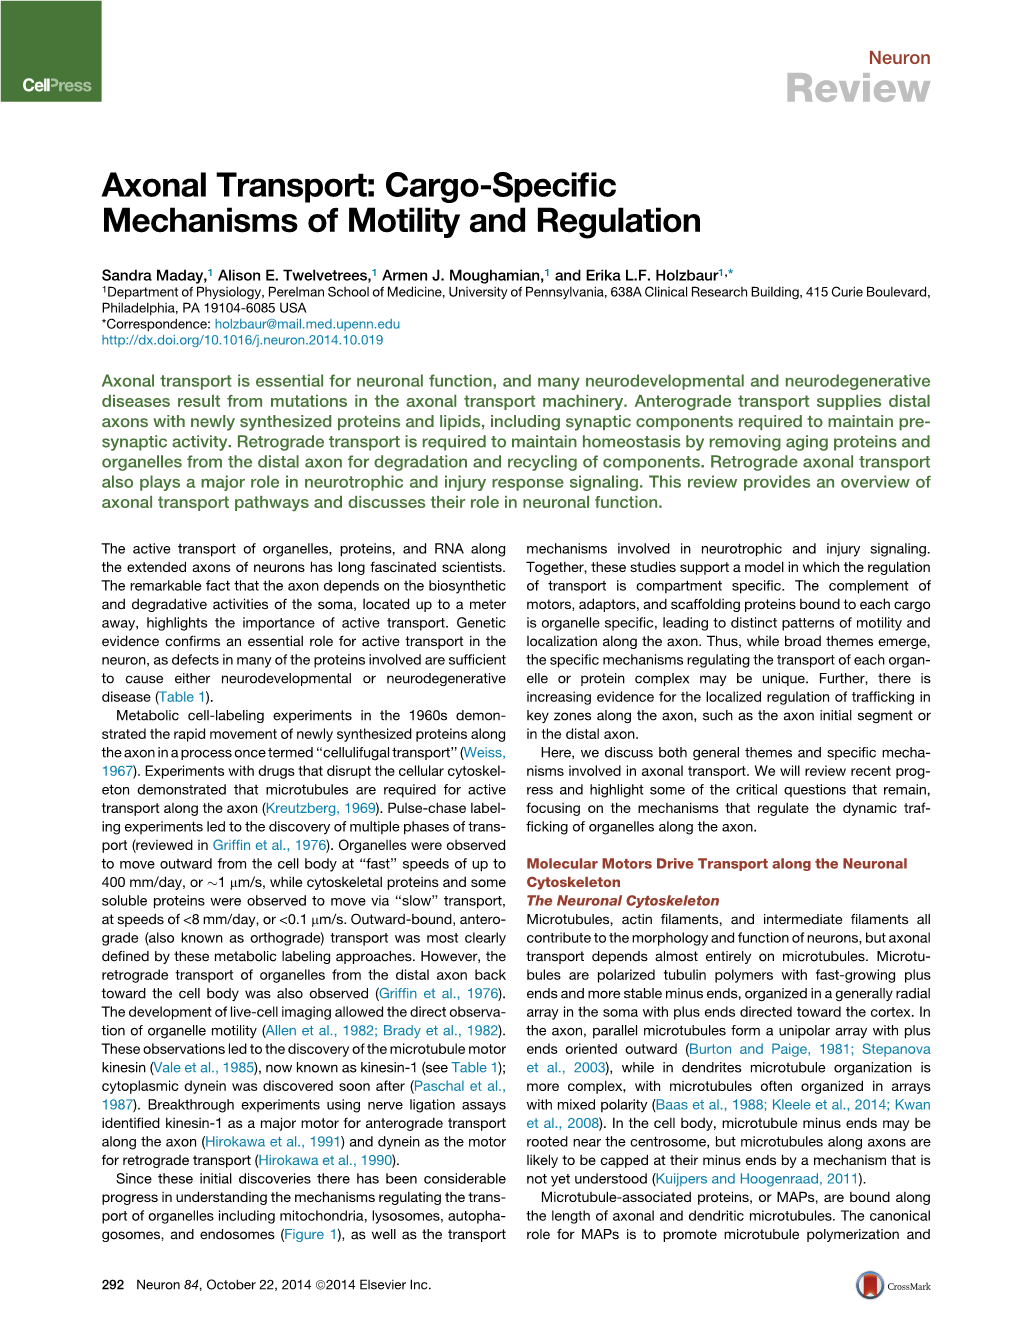 Axonal Transport: Cargo-Specific Mechanisms of Motility And